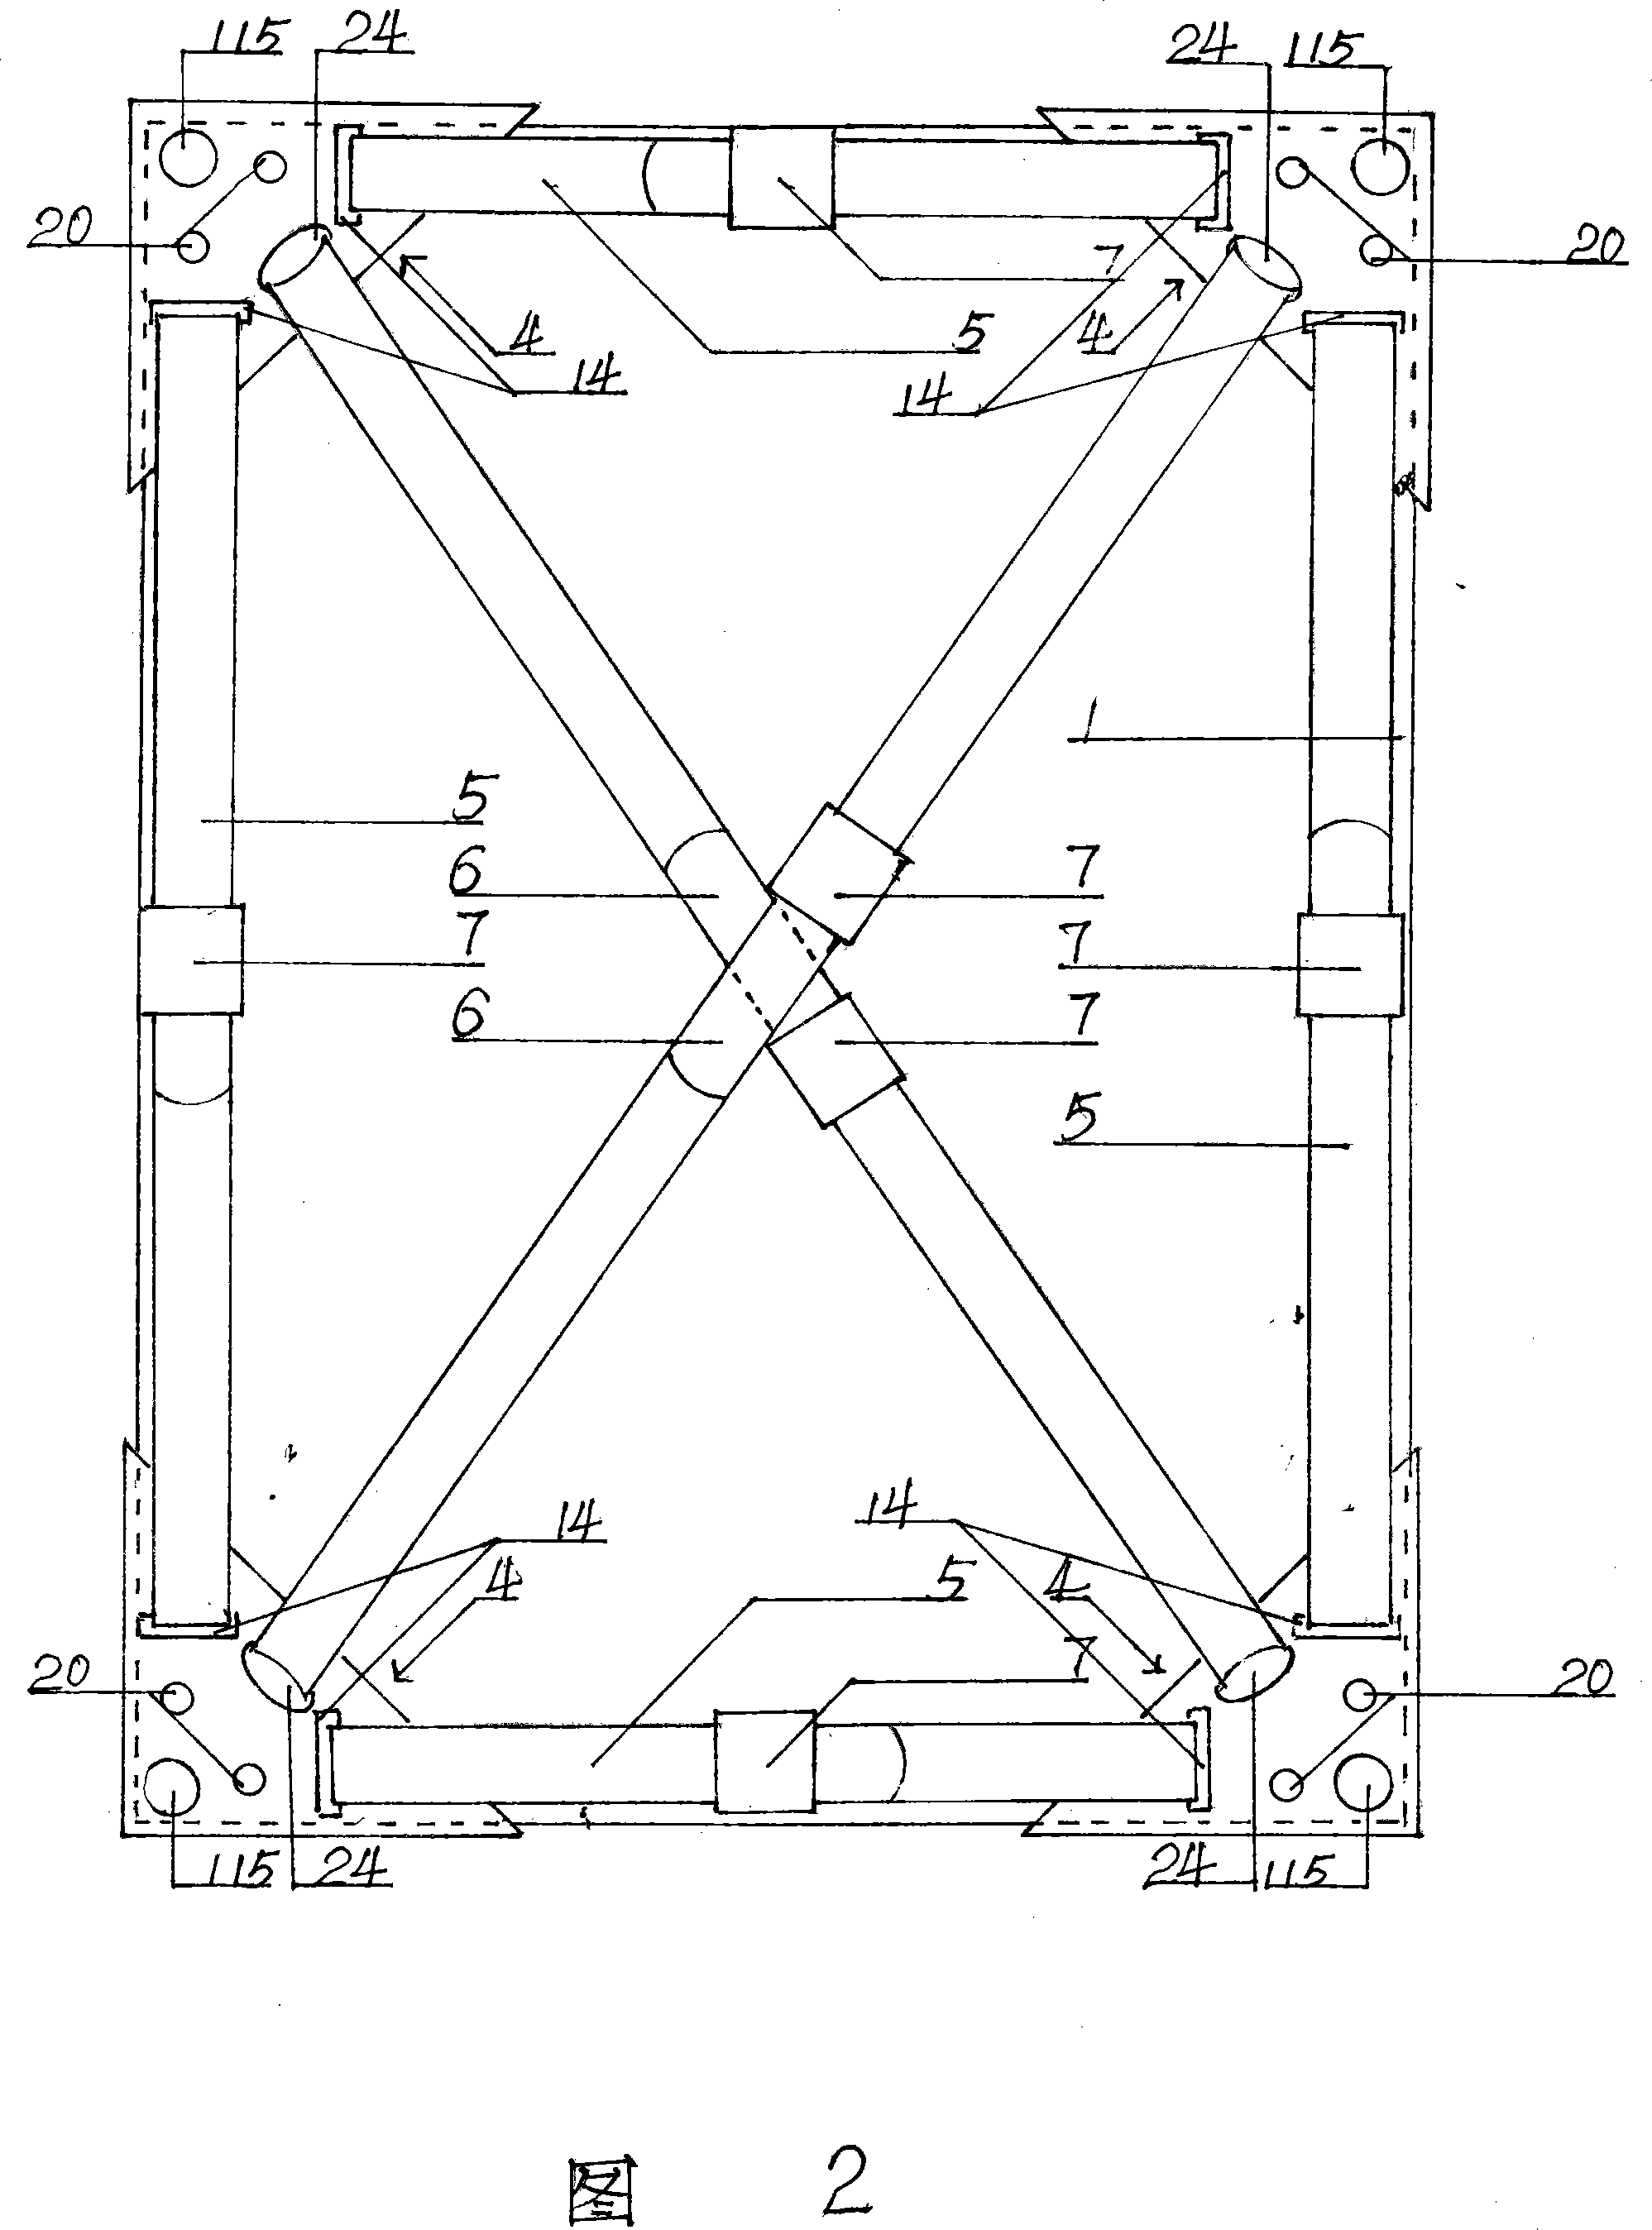 Device for binding gallus of portable notebook type computer